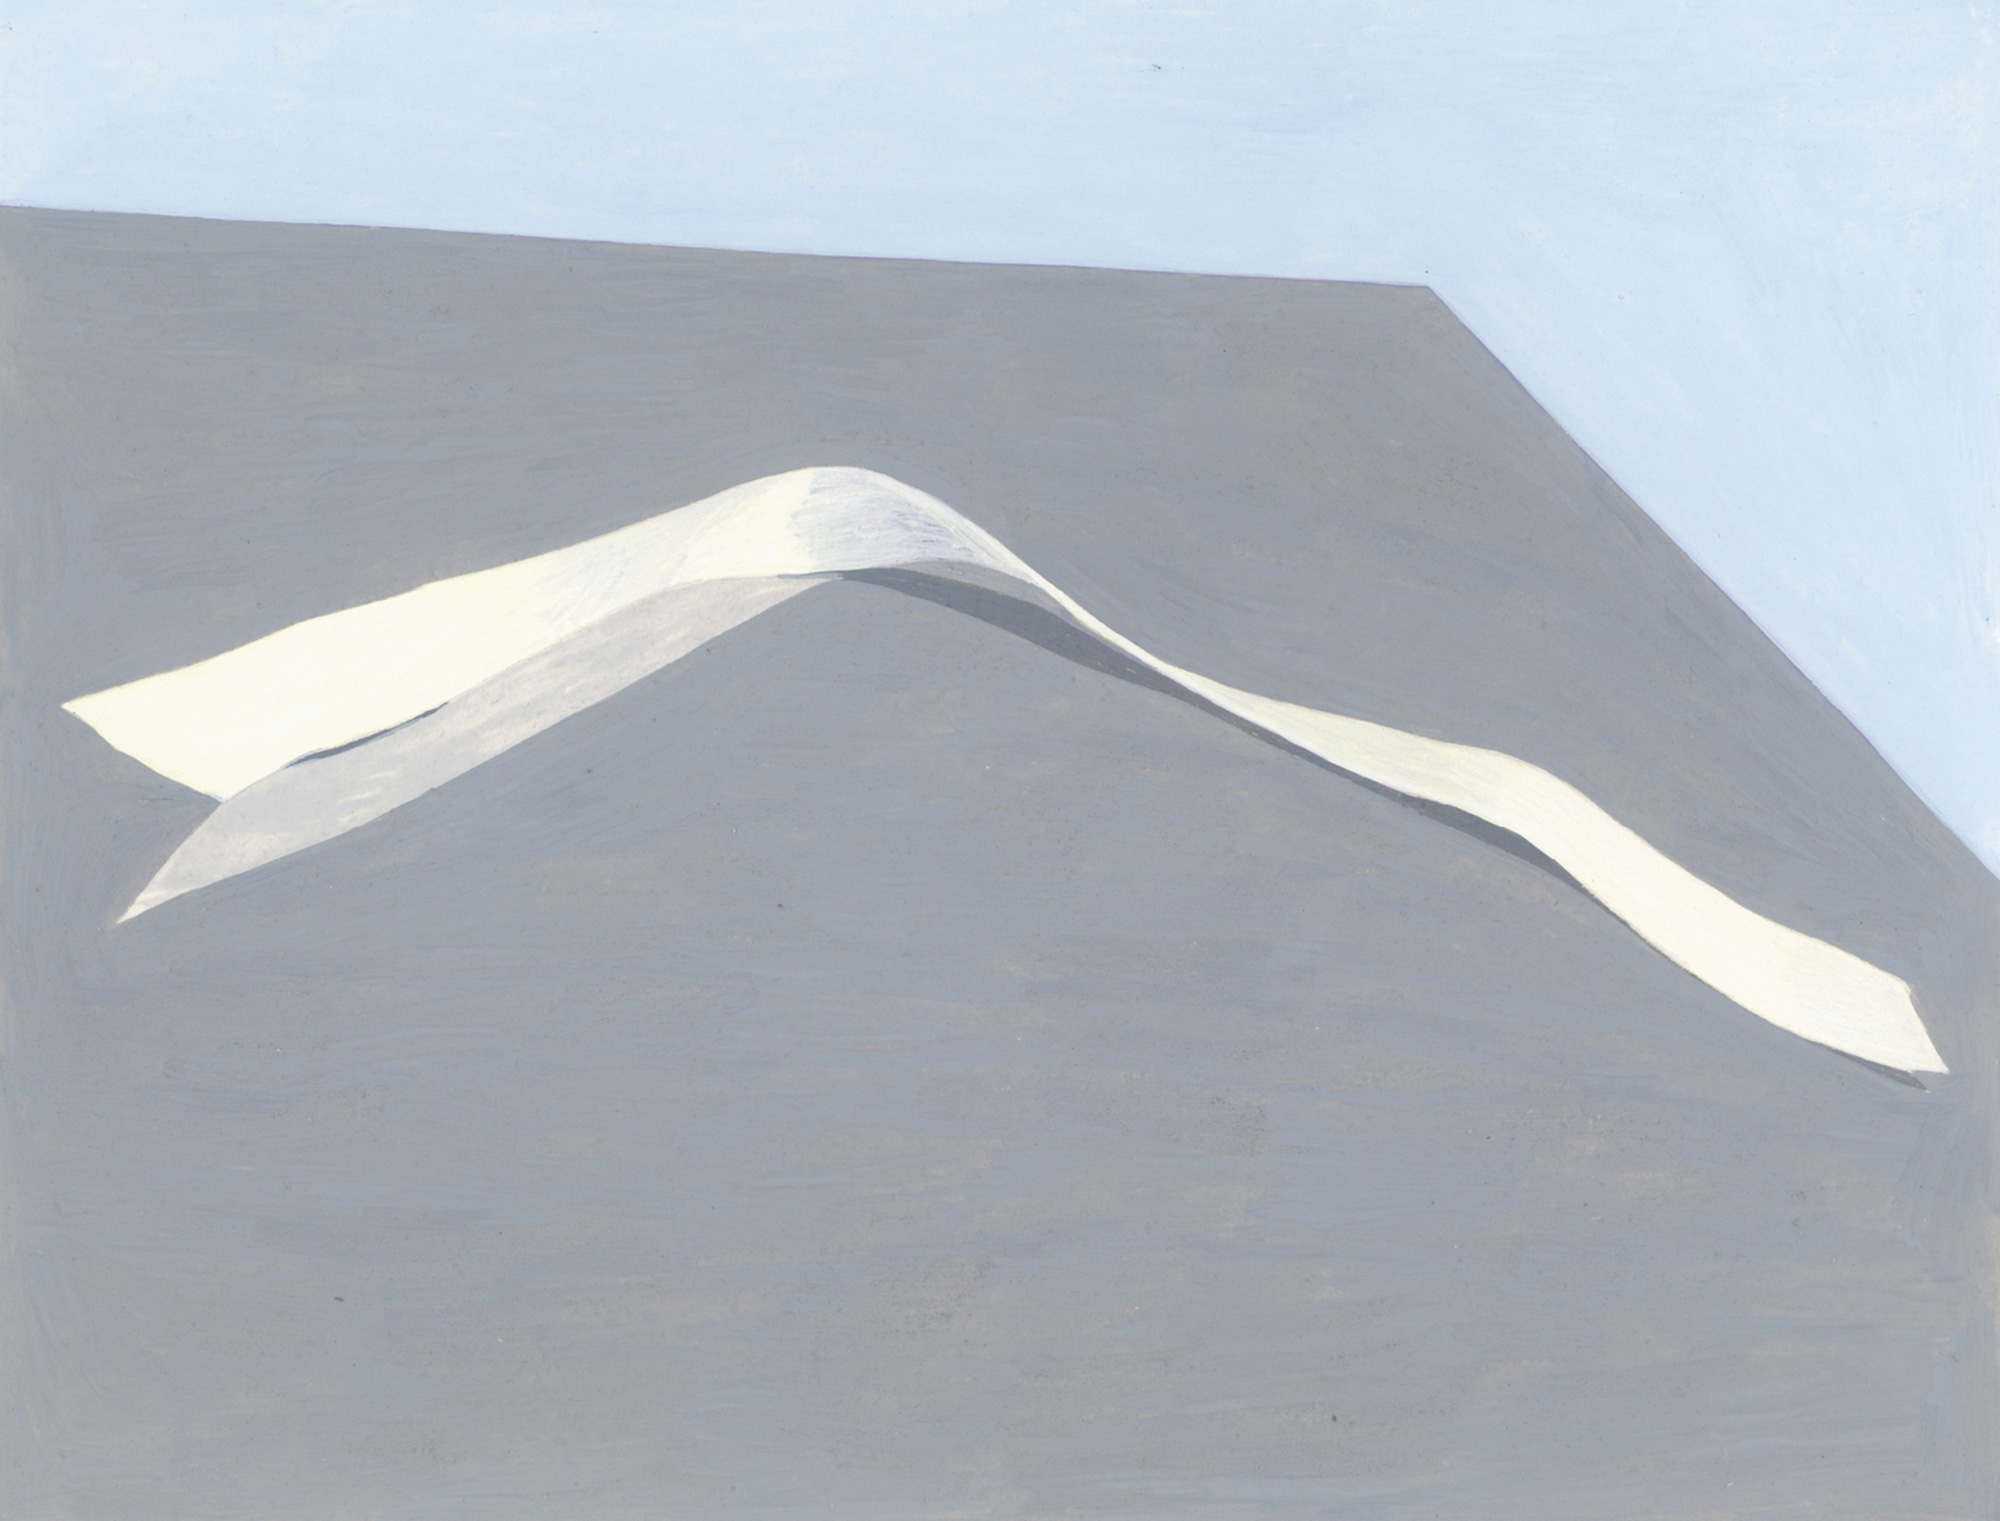 A two thousand and fourteen painting by Amy Jean Porter of a white ribbon, titled “Ribbon.”